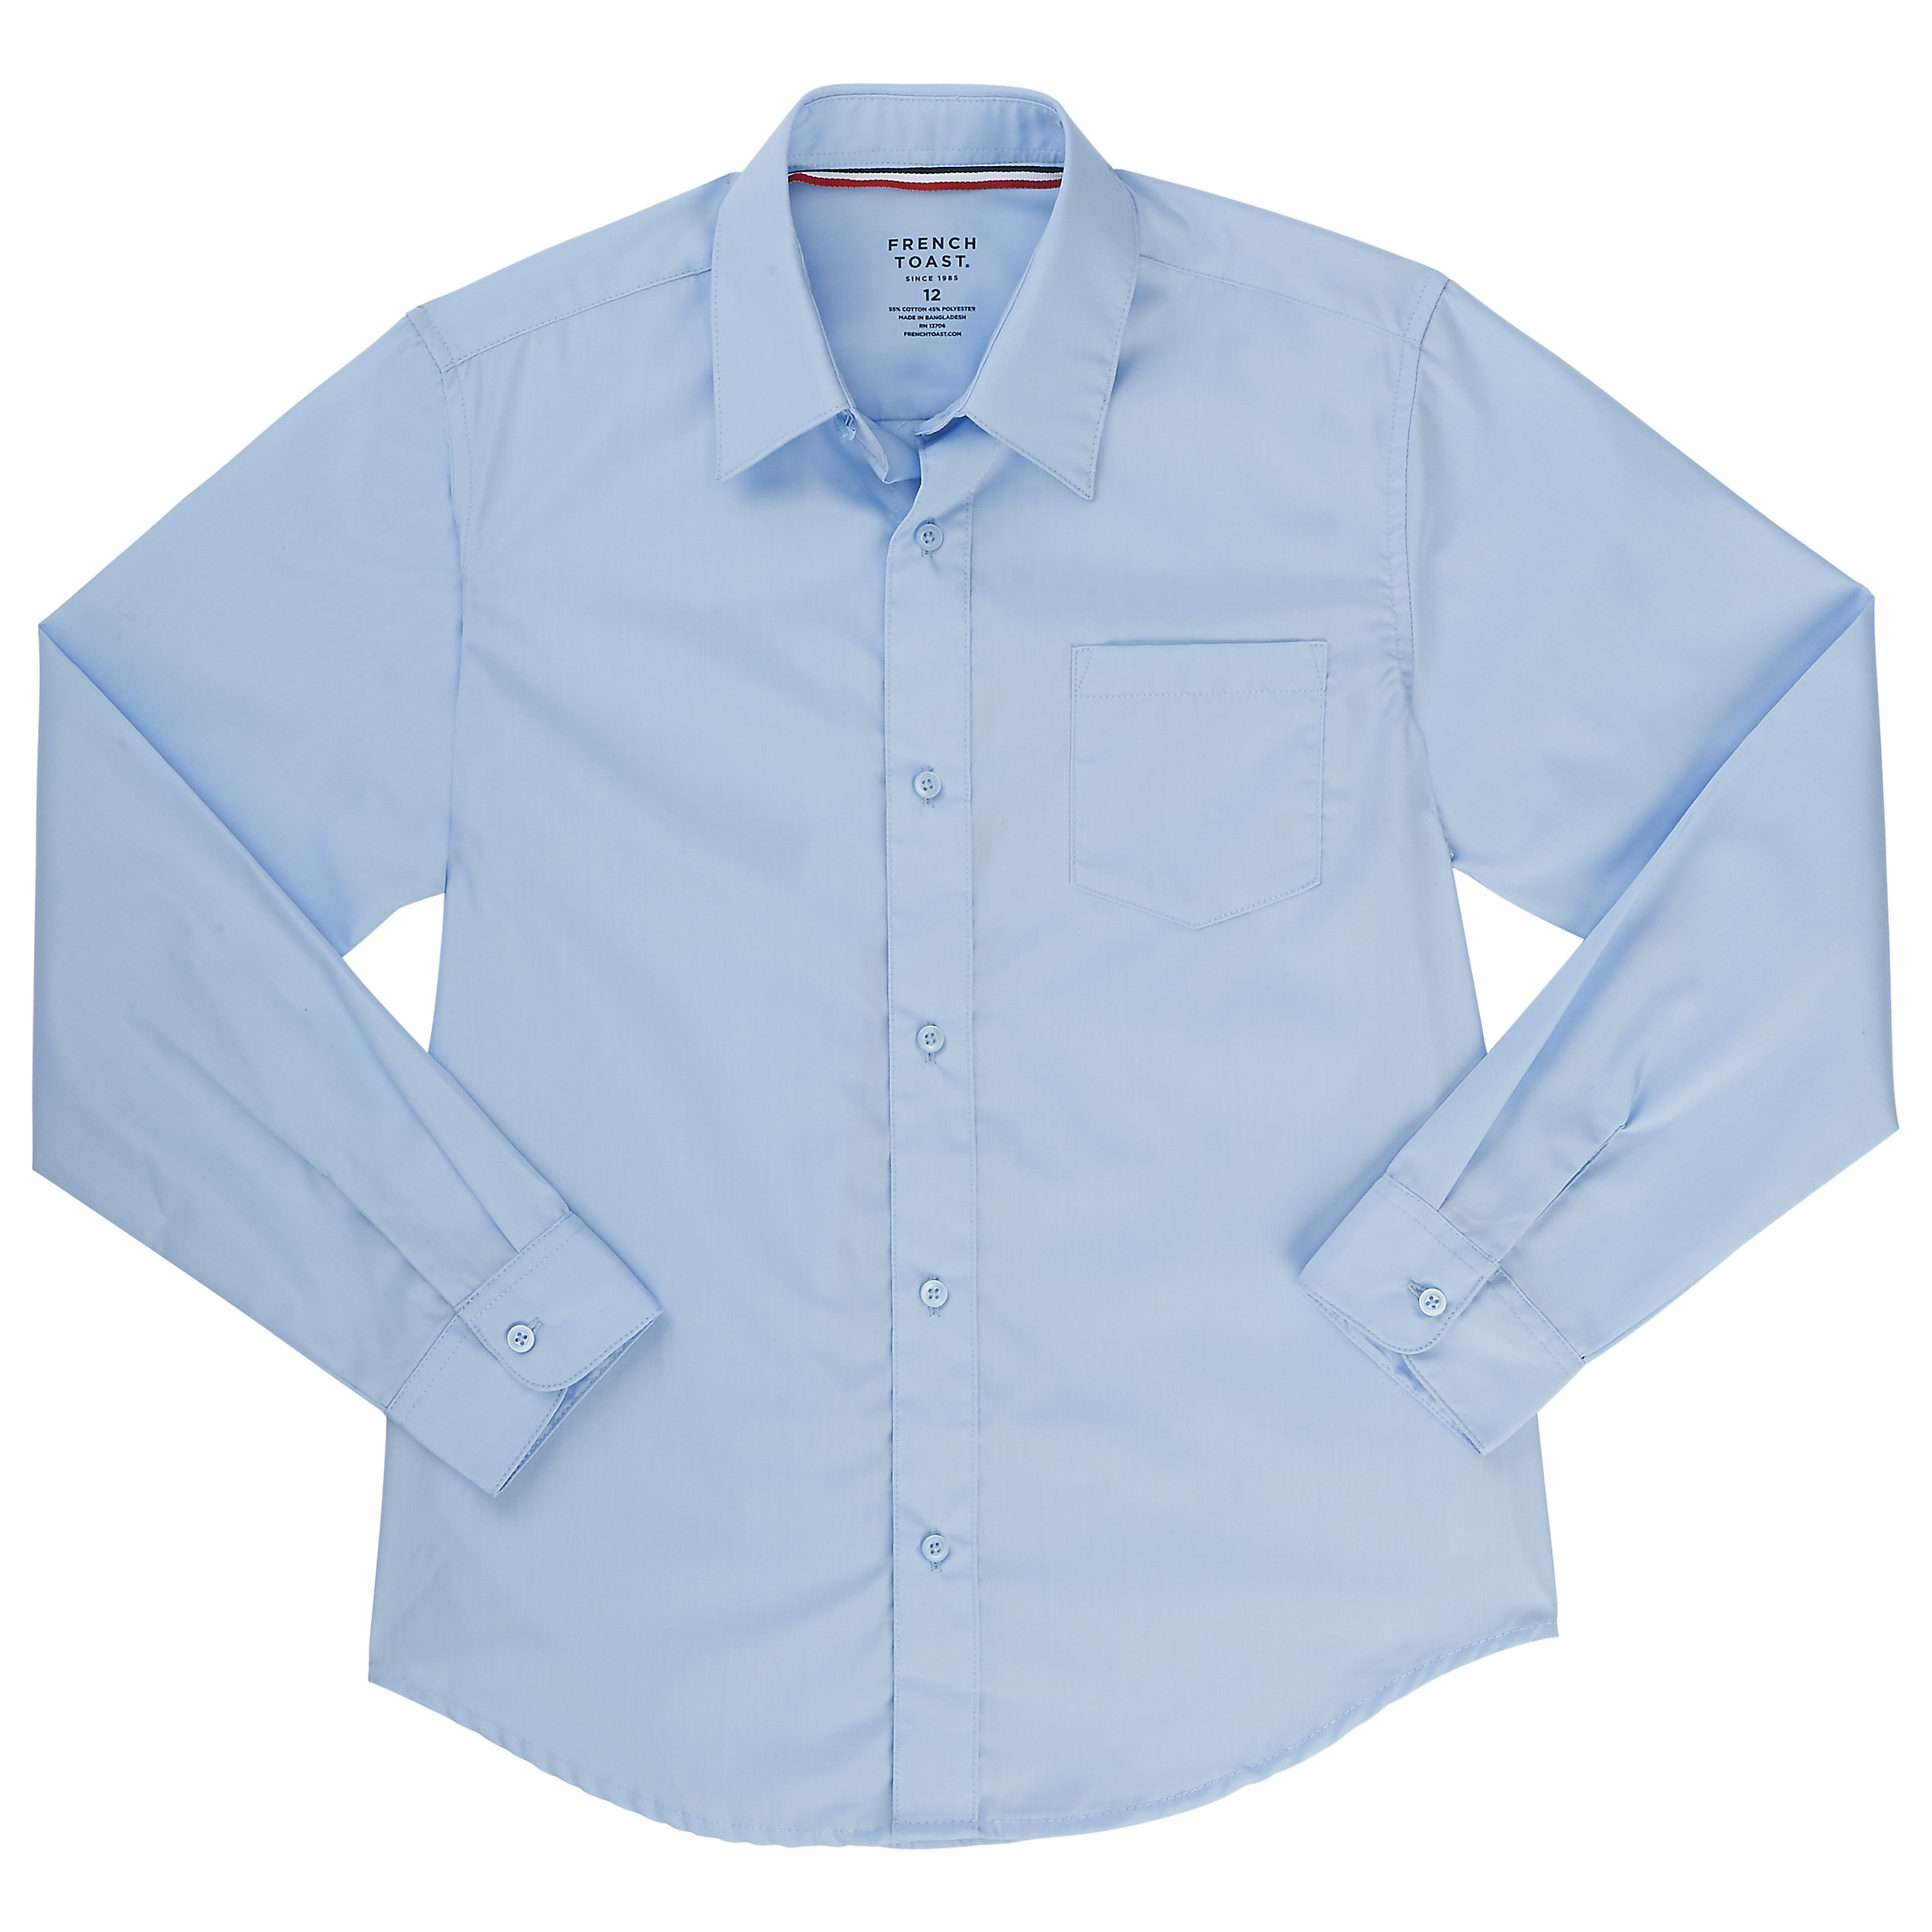 At School by French Toast Long Sleeve Classic Dress Shirt